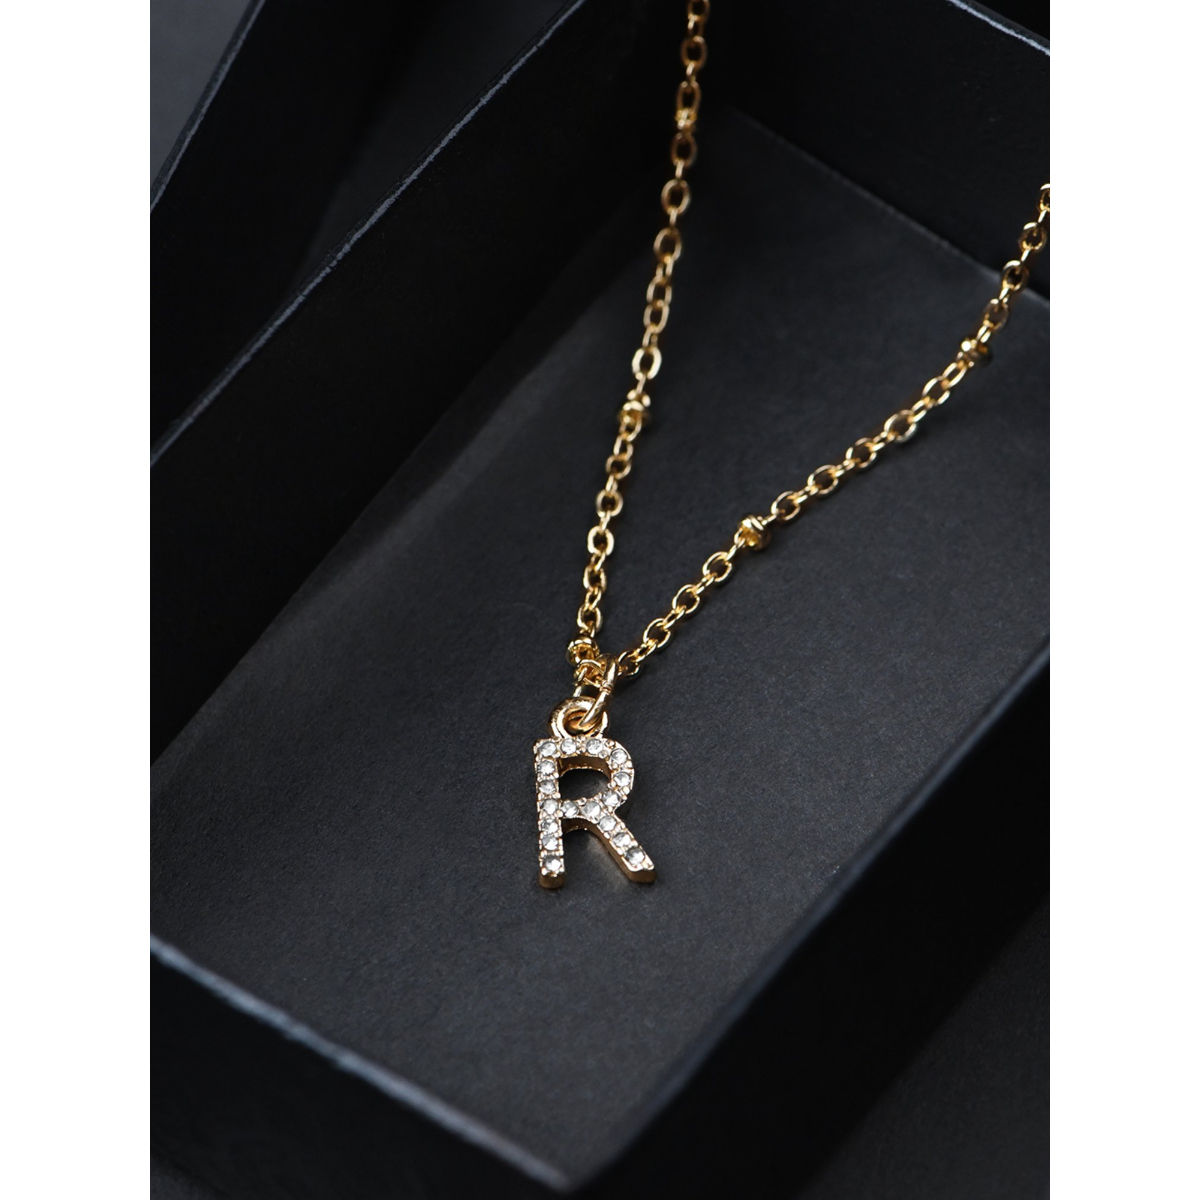 R Initial Necklace - Charm Necklace - 14KT Gold Layered Necklace - Lulus